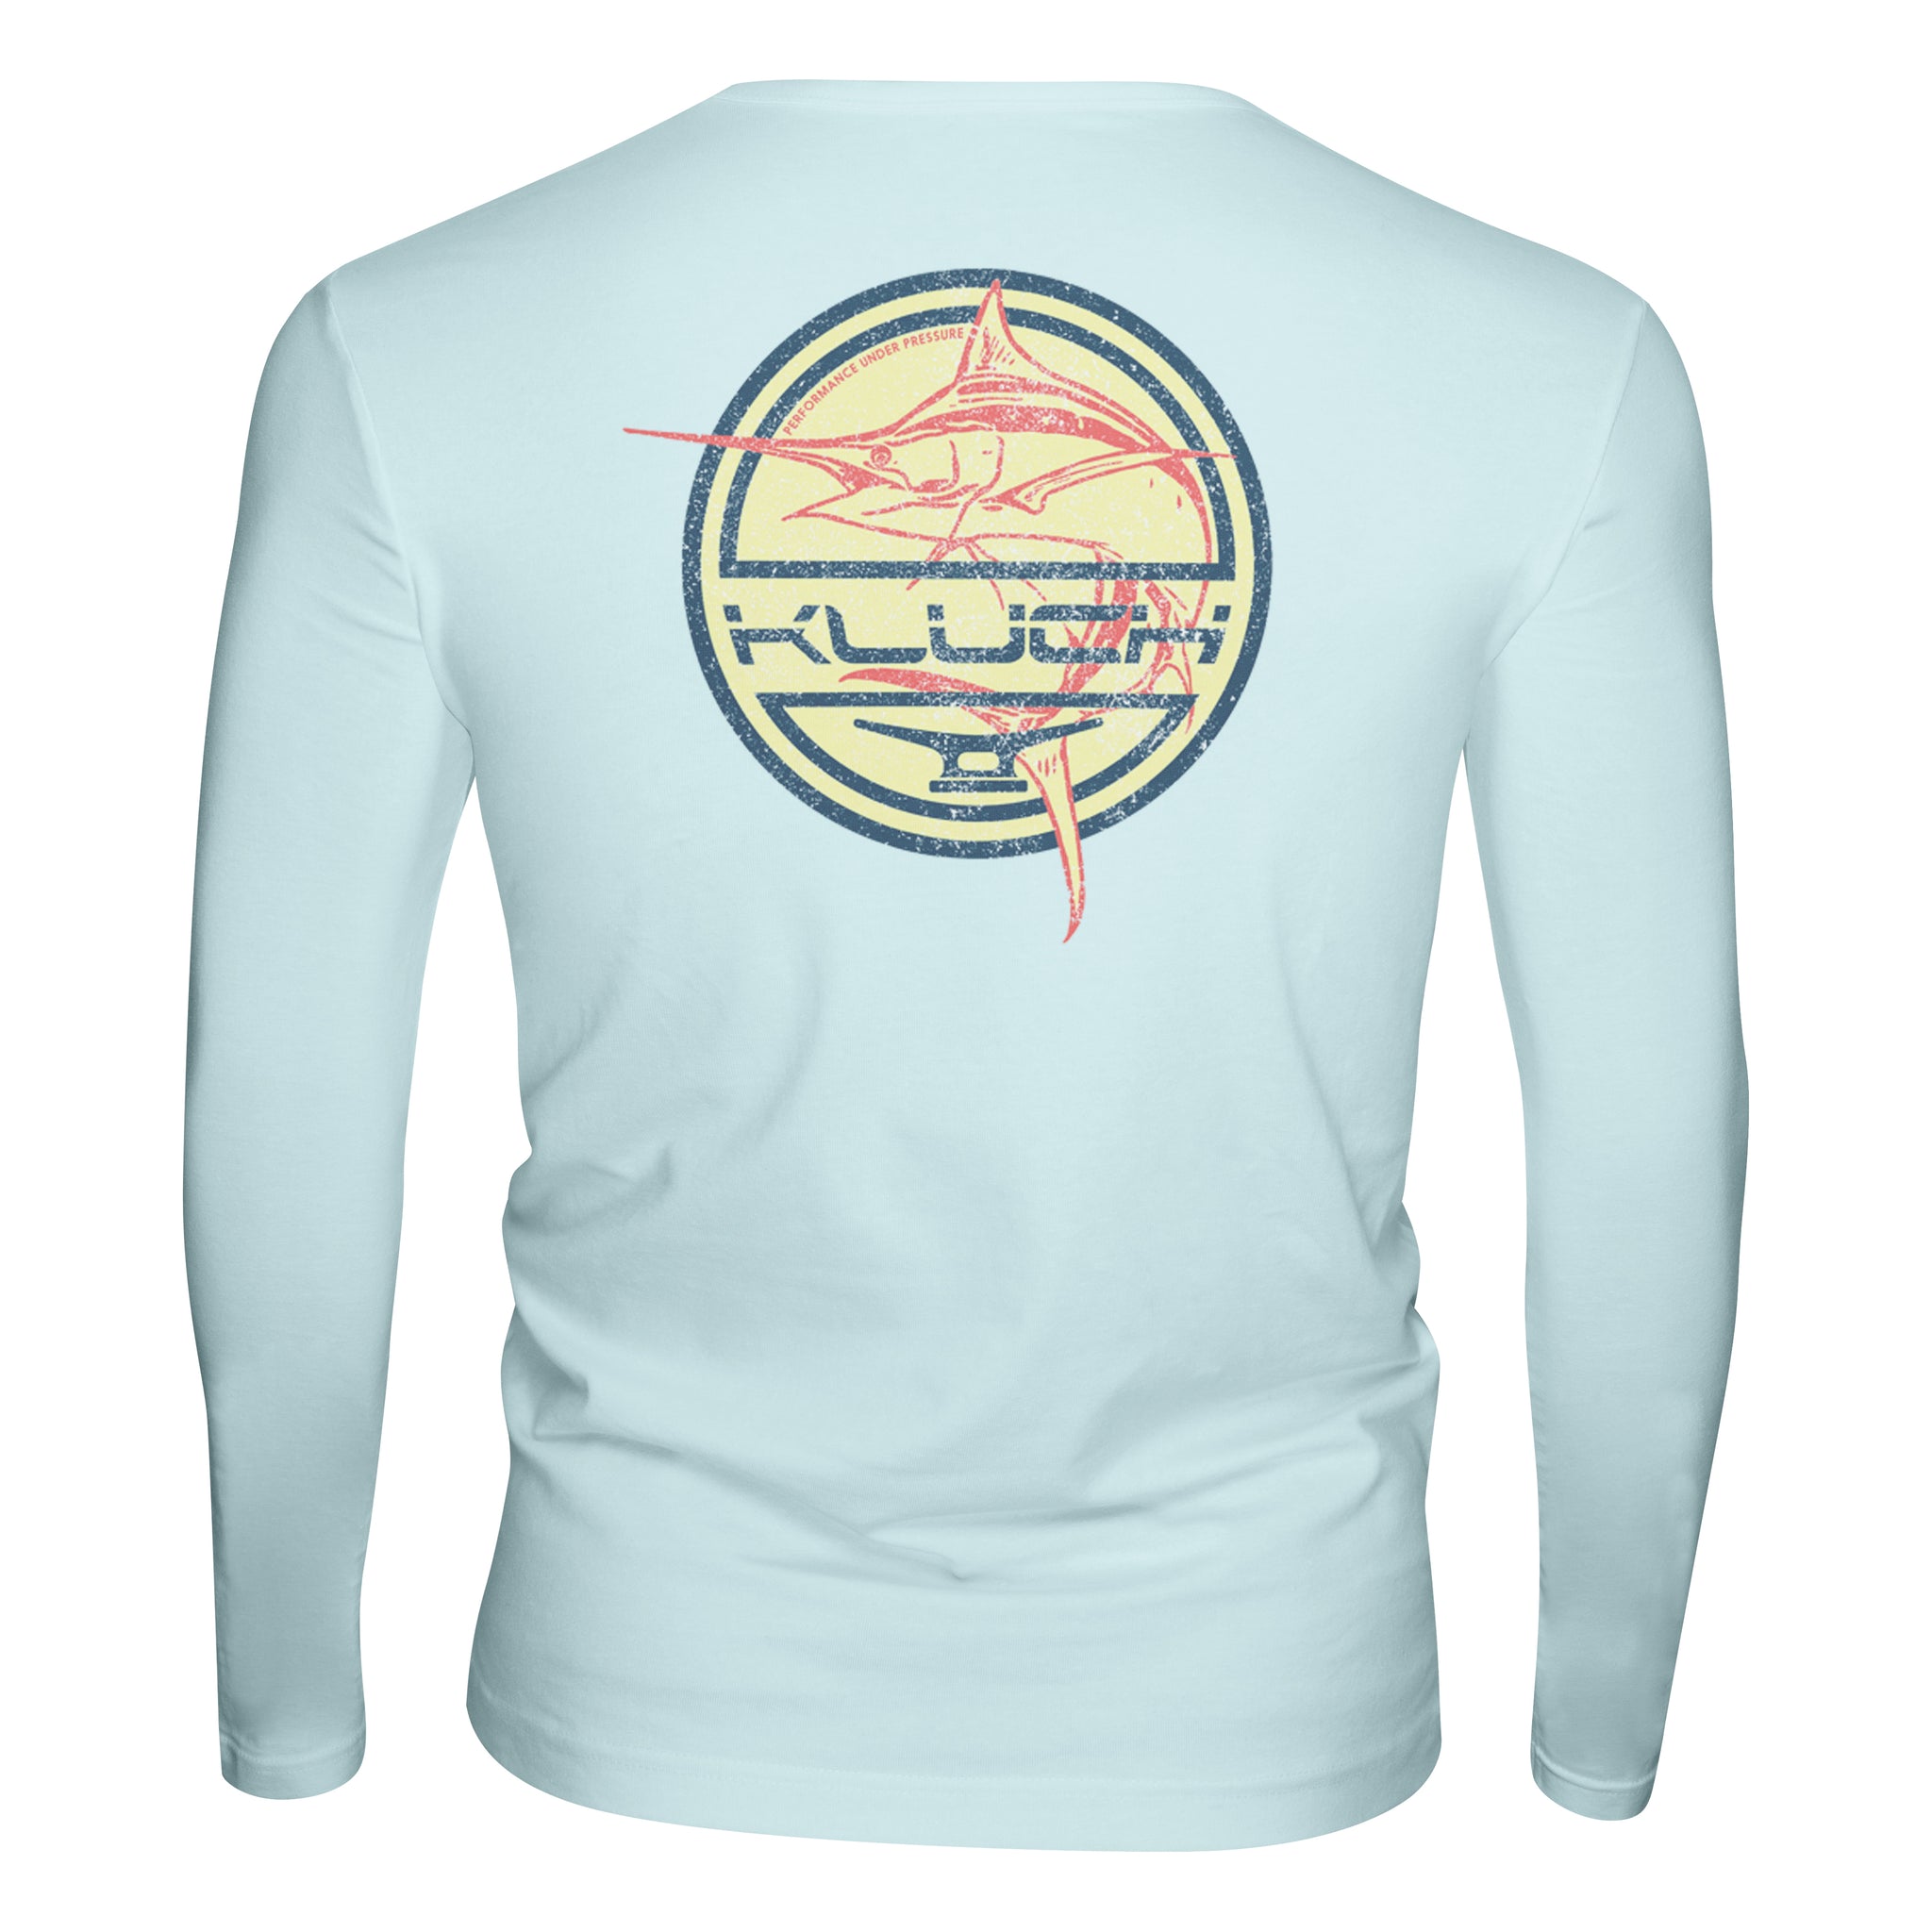 Kluch Nugget Whistle Long Sleeve Performance - Kluch Apparel